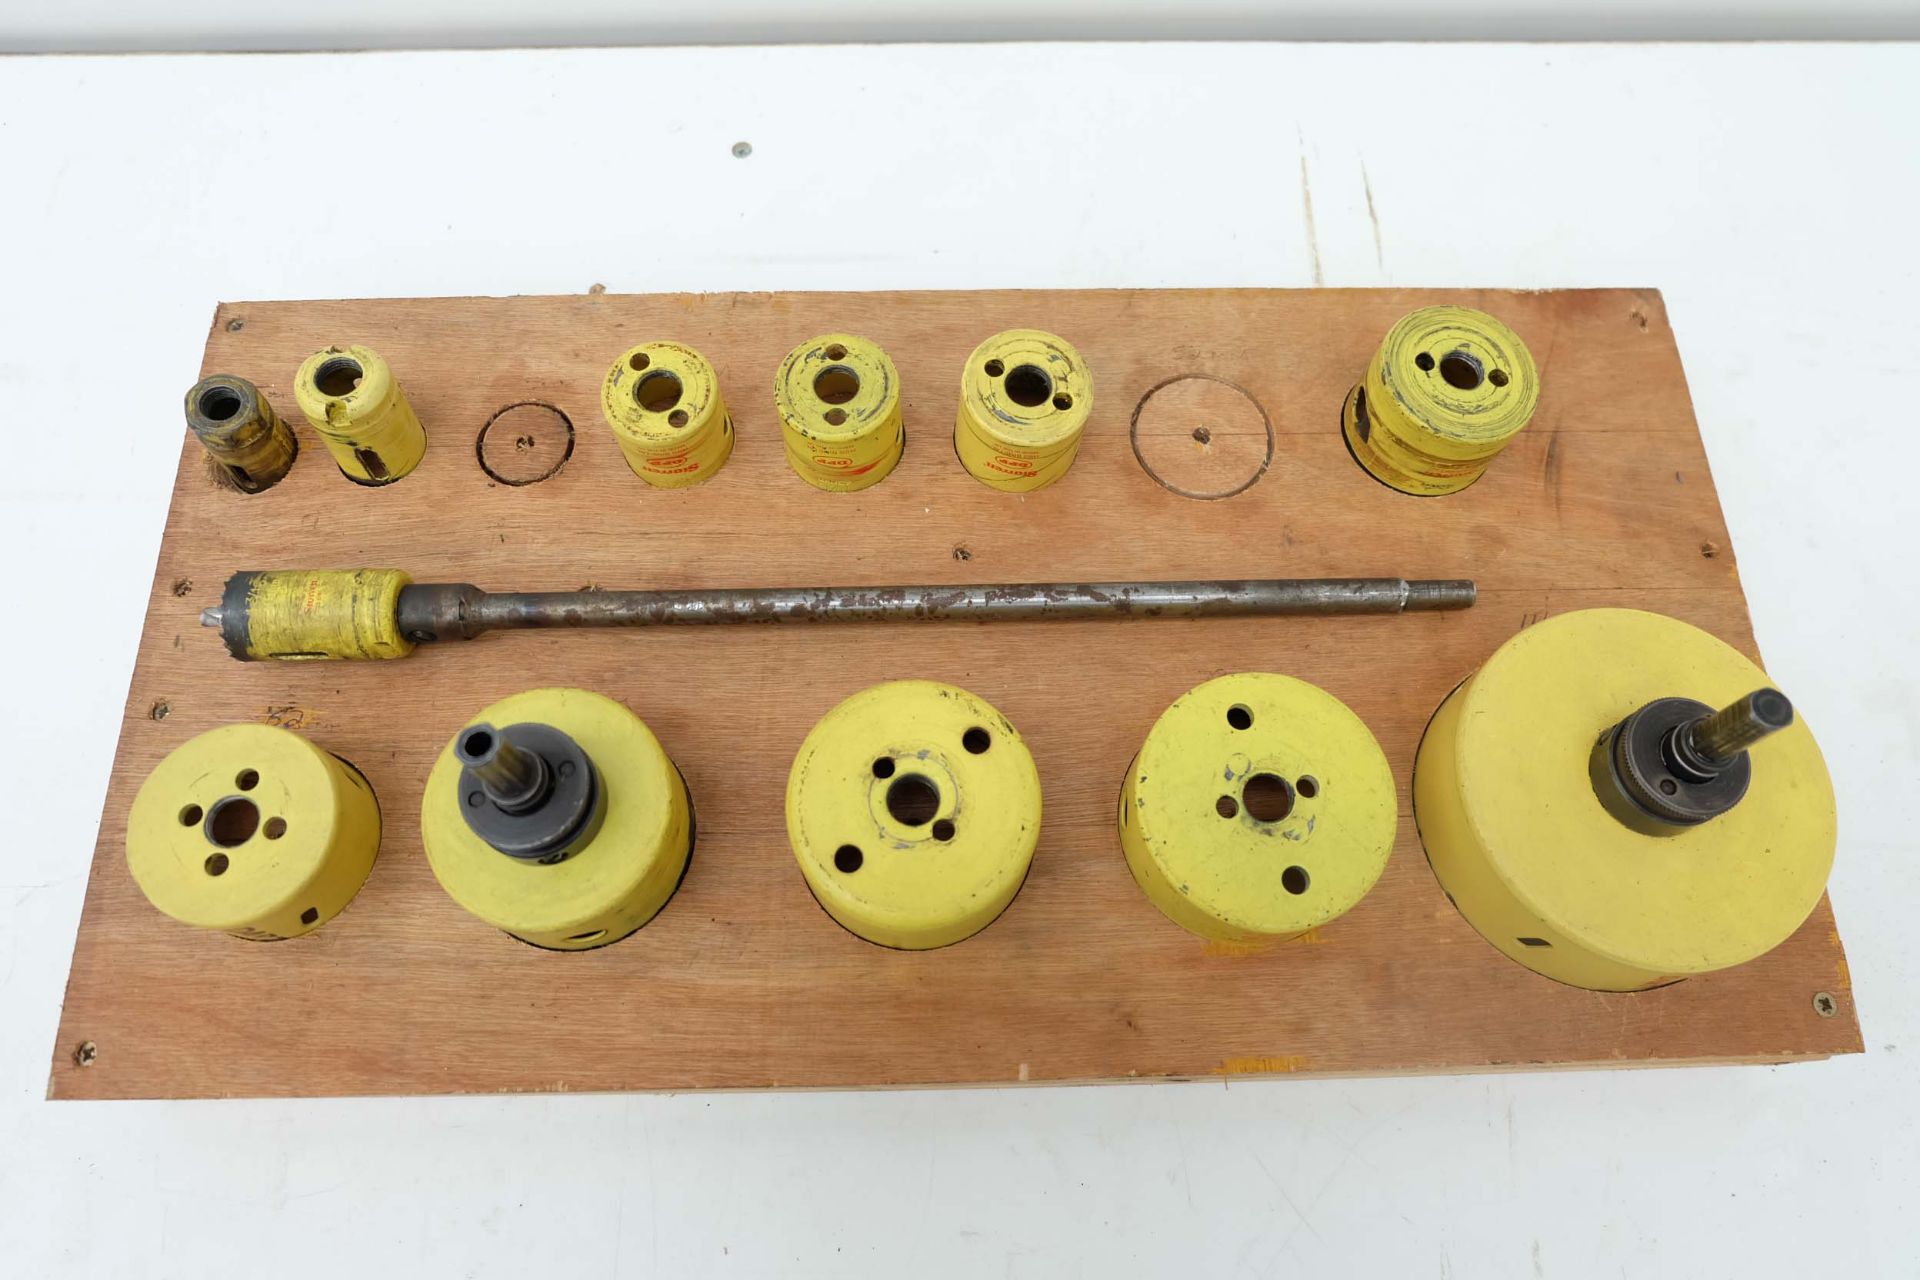 12 Hole Cutters. Sizes 25, 30, 32, 40, 43, 44, 56, 62, 73, 76, 79, 114mm Diameter. - Image 3 of 5